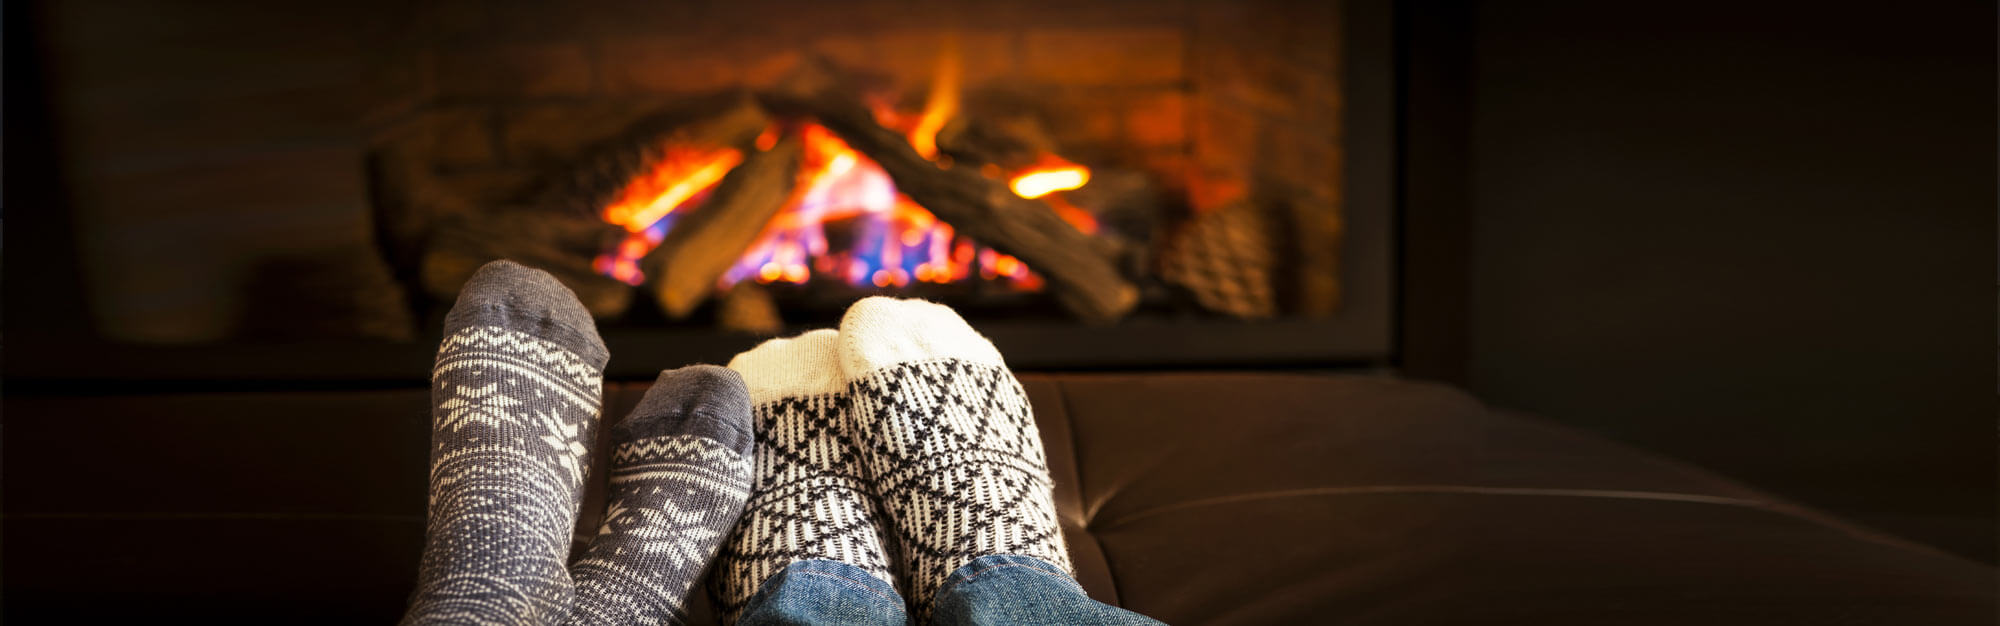 Two pairs of feet wearing warm winter socks warming in front of a fireplace